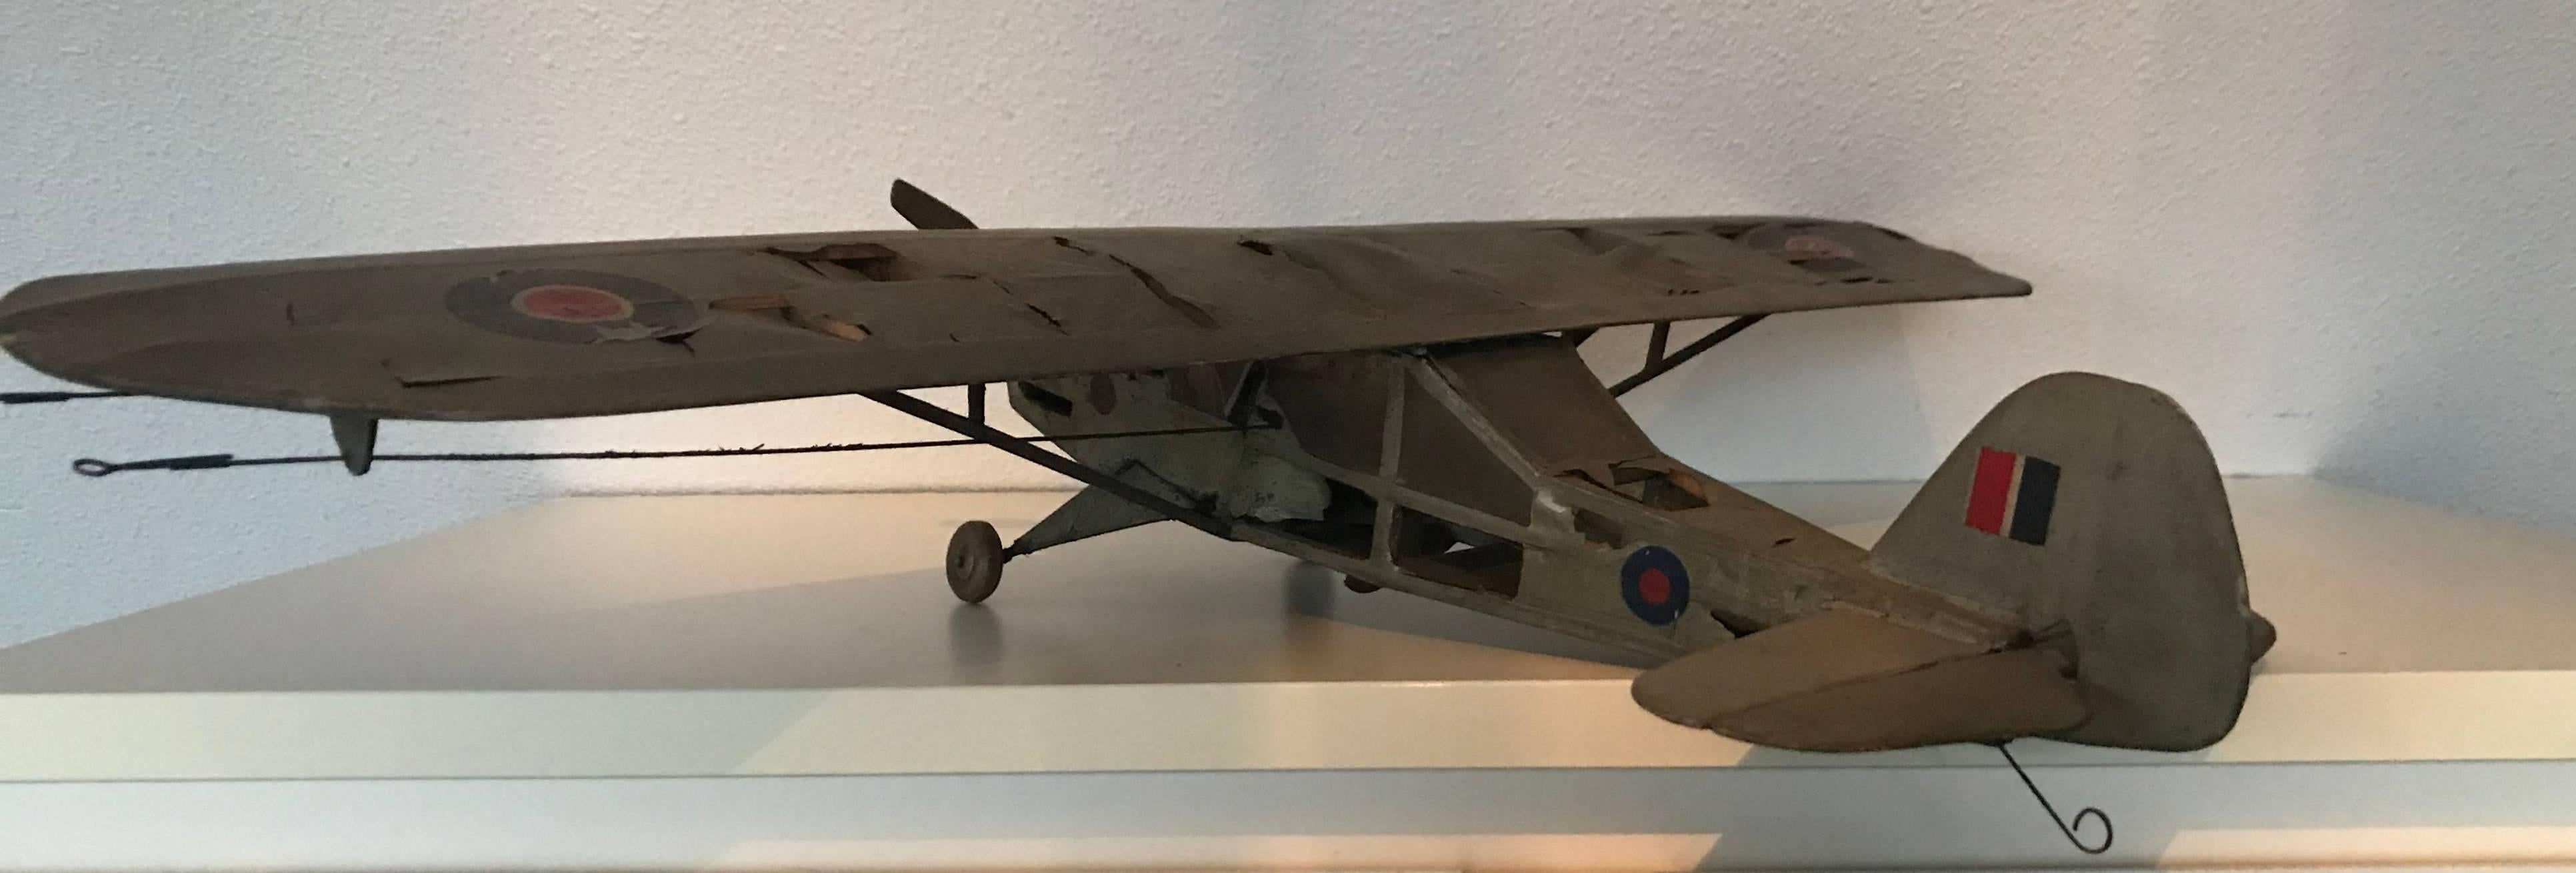 Airplane Model For Sale 1